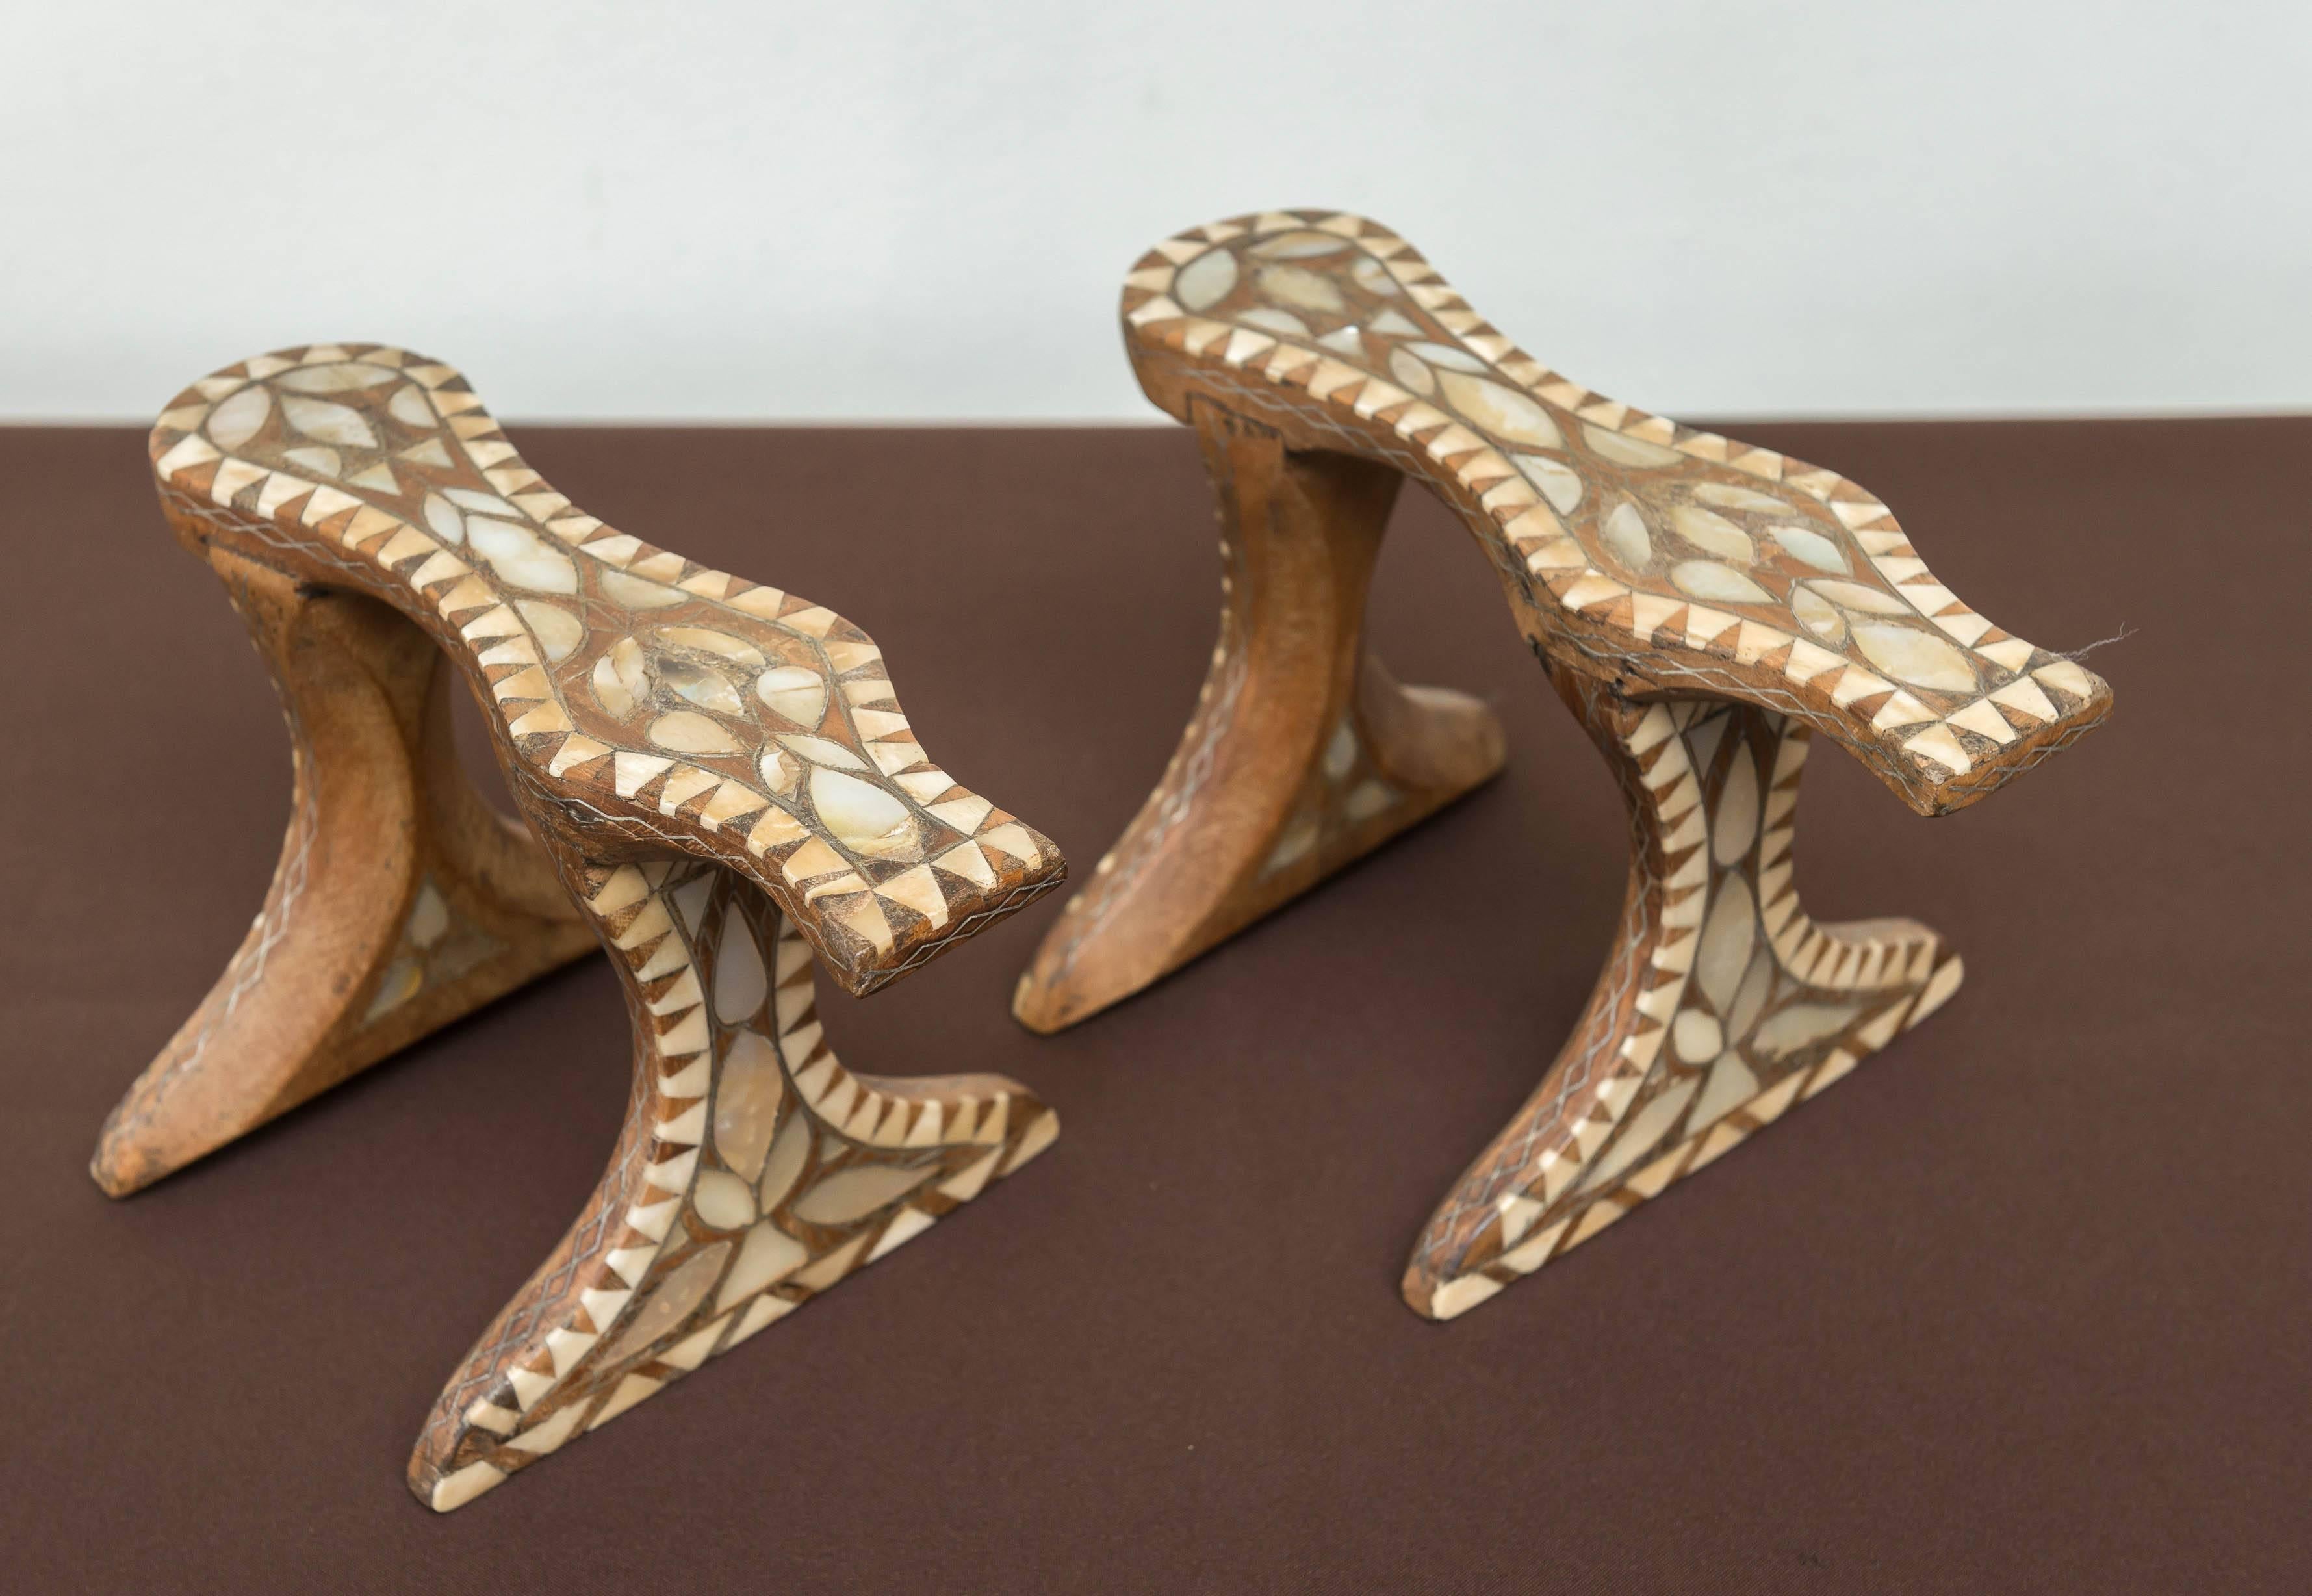 Pair of exotic late 19th c. / early 20th c. Turkish bath shoes. Hand carved rosewood with an interesting elevated platform last. inlaid with bone, mother-of-pearl and pewter. Circa 1890 -1910.